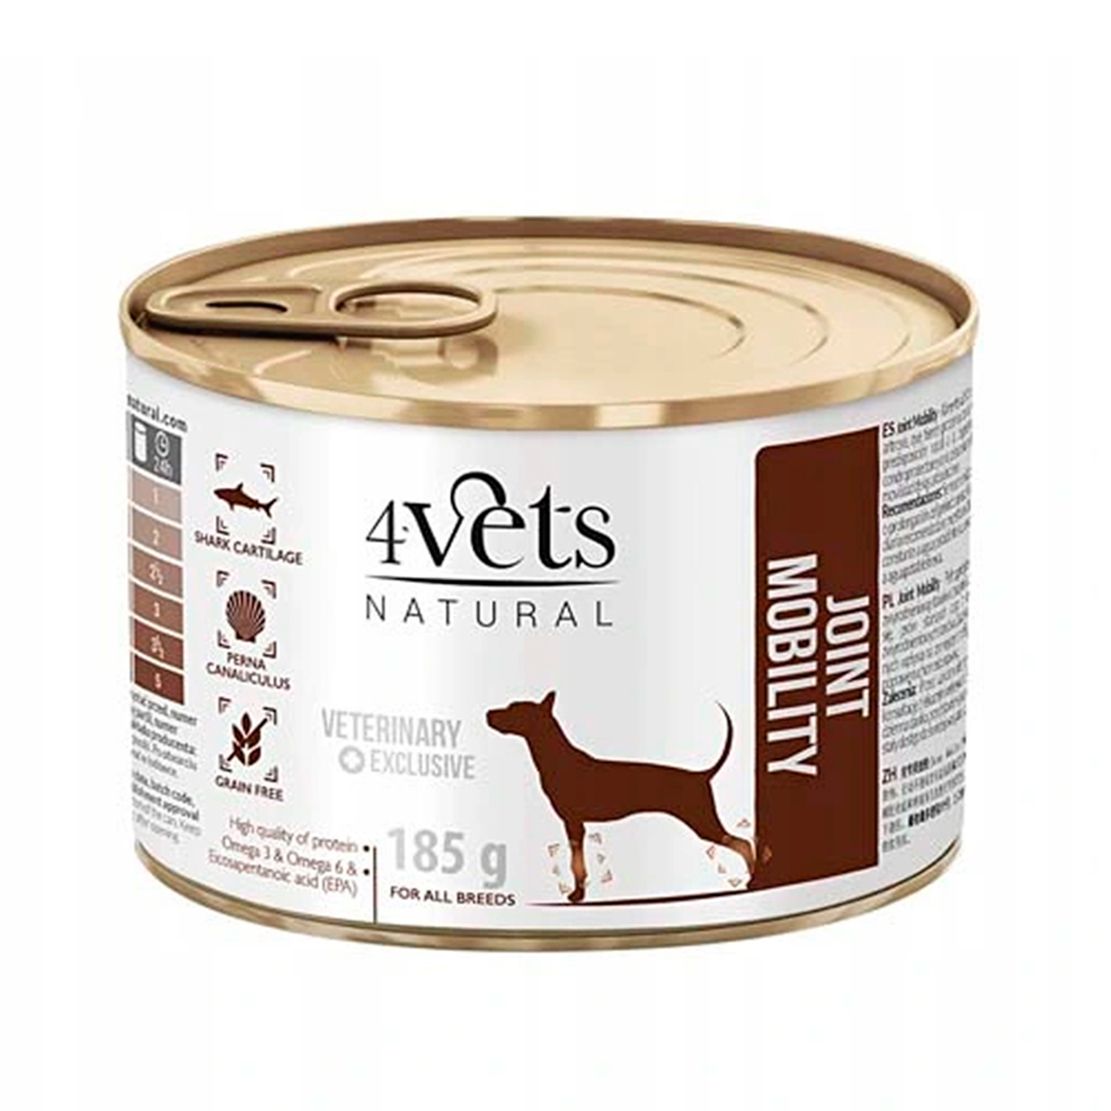 4Vets Natural Veterinary Exclusive JOINT MOBILITY 185 g